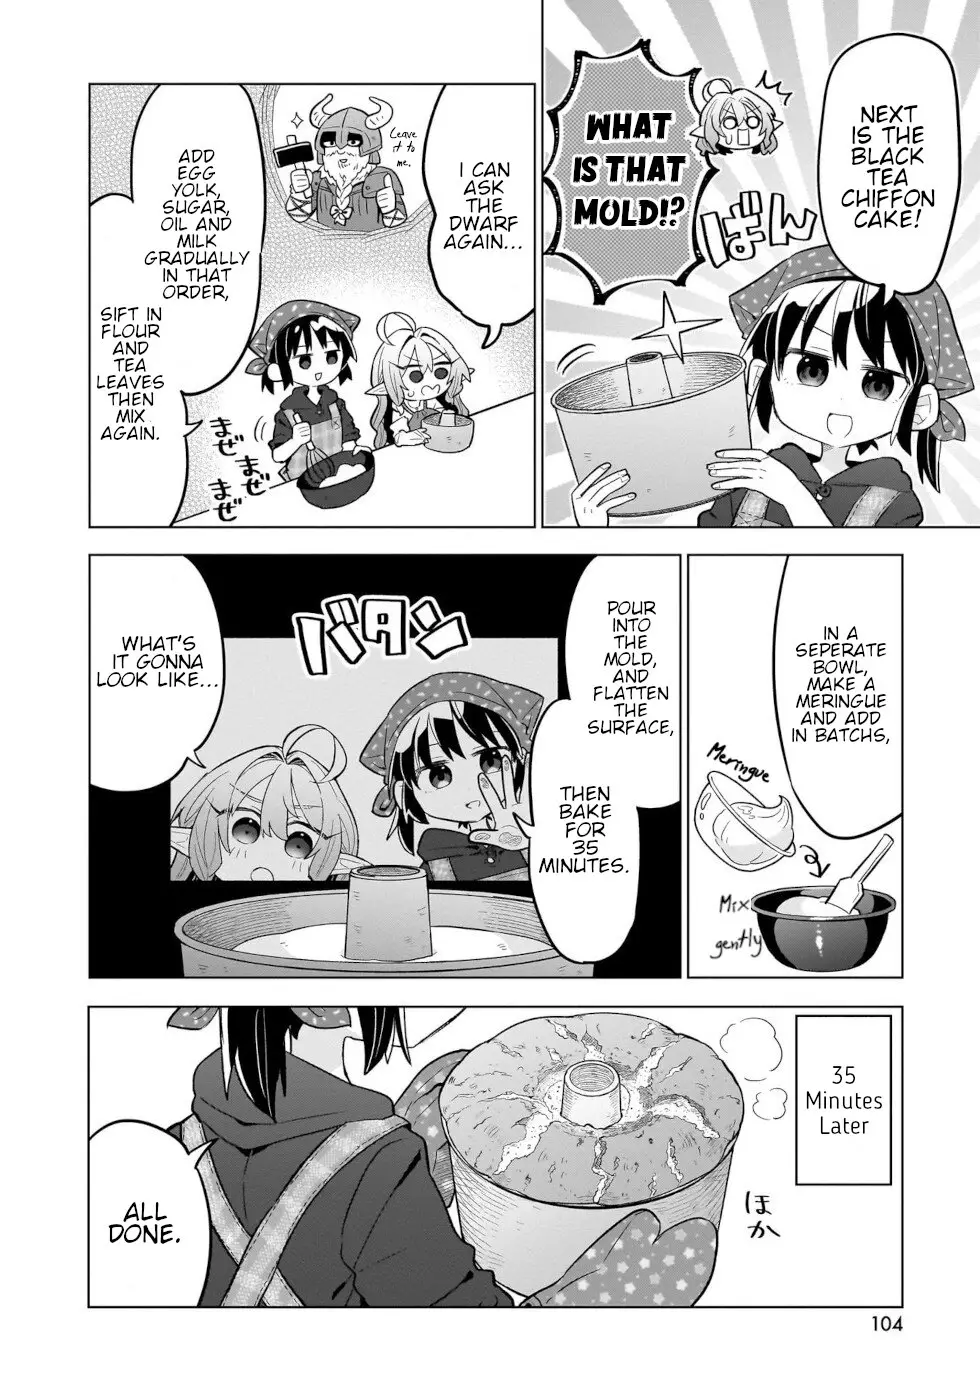 Sweets, Elf, And A High School Girl - 4 page 12-98993658